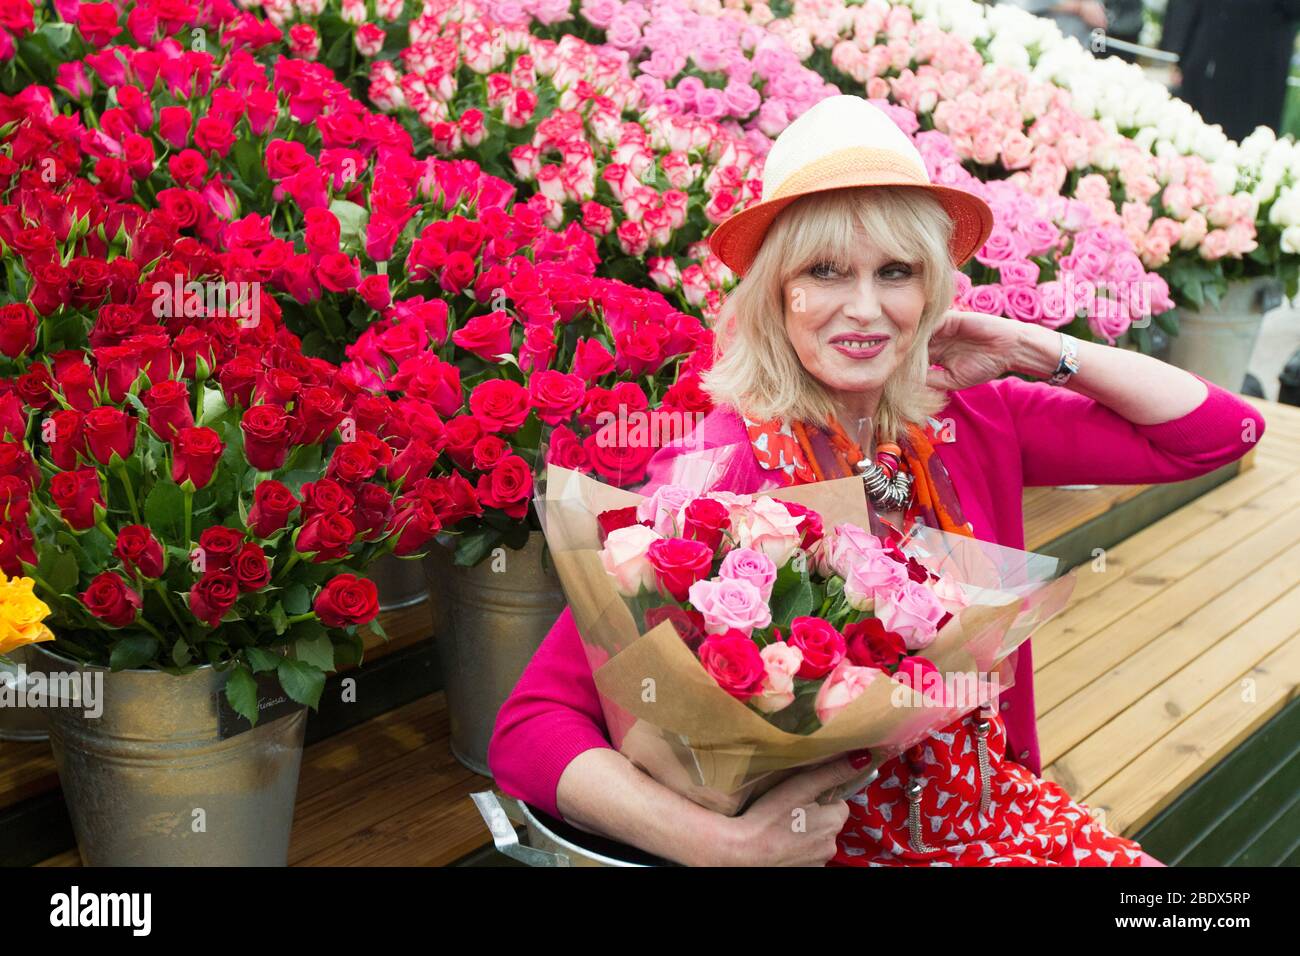 Actress, author, activist and presenter Joanna Lumley shows off some roses at the Chelsea Flower Show.Famously know for Absolutely Fabulous and others. Stock Photo